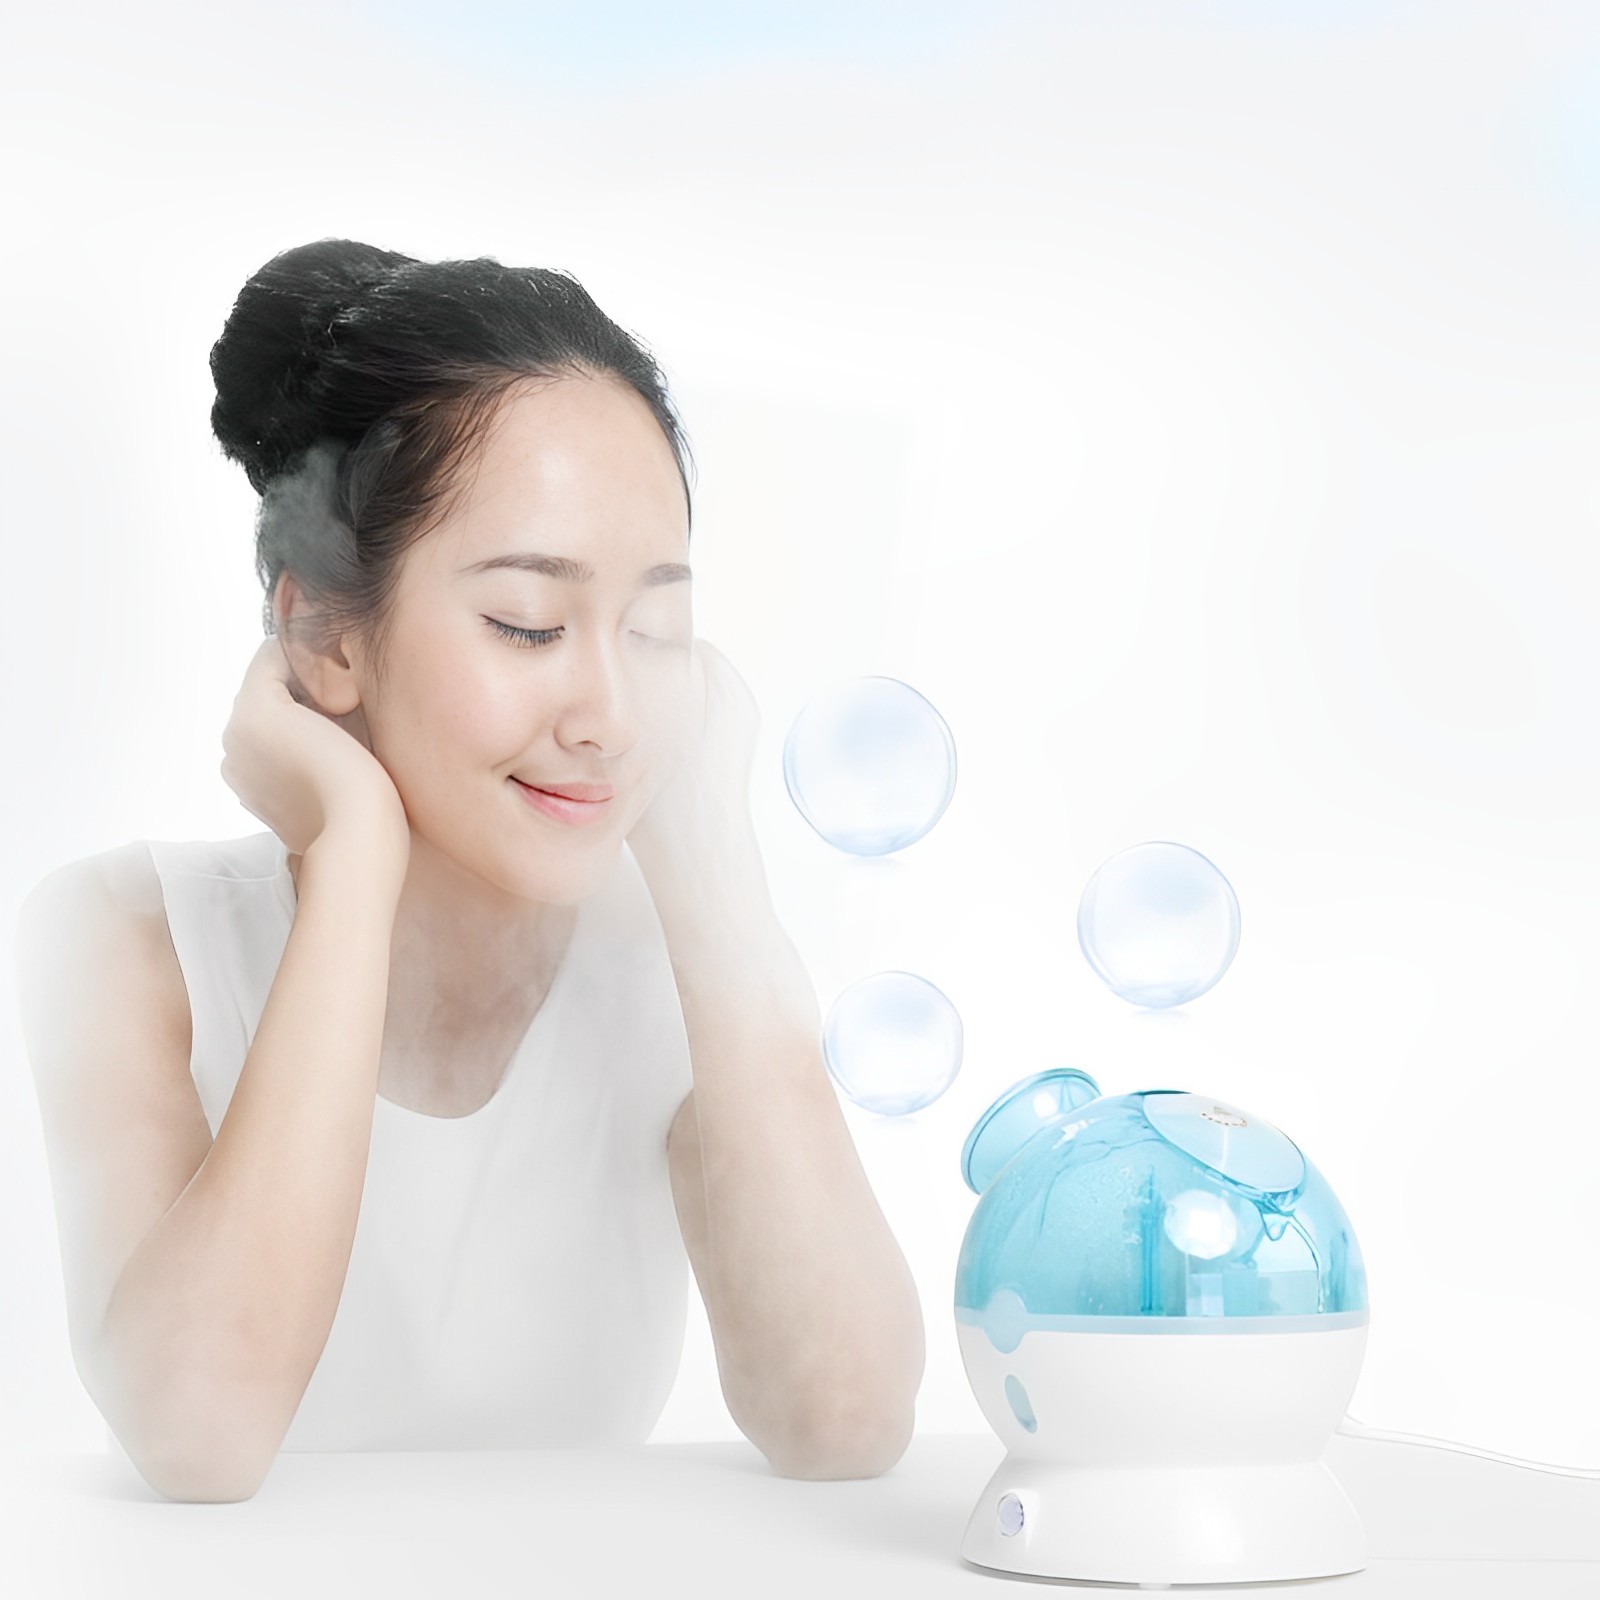 Quick Mist for Refreshed Eyes | Facial Steamer with Elegant Nozzle Design | Globe-shaped Body | Easy One-button Operation | Max Water Level Line